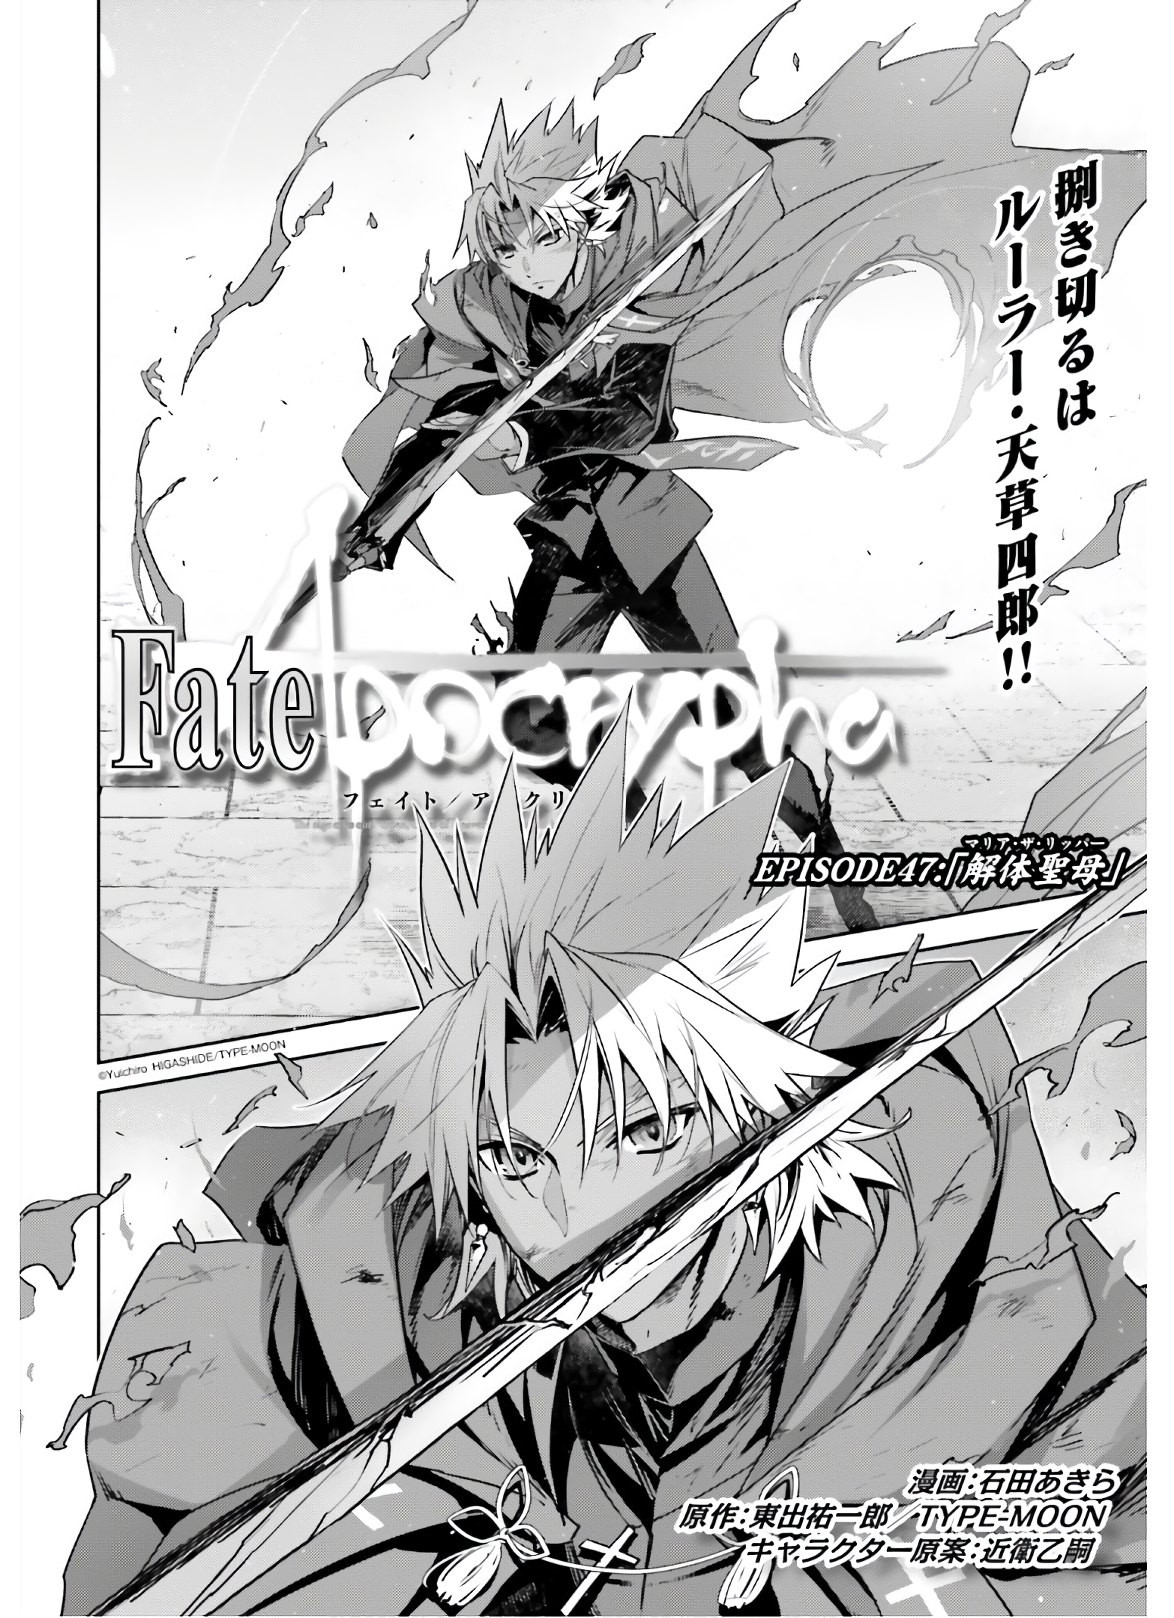 Fate-Apocrypha - Chapter 47 - Page 2